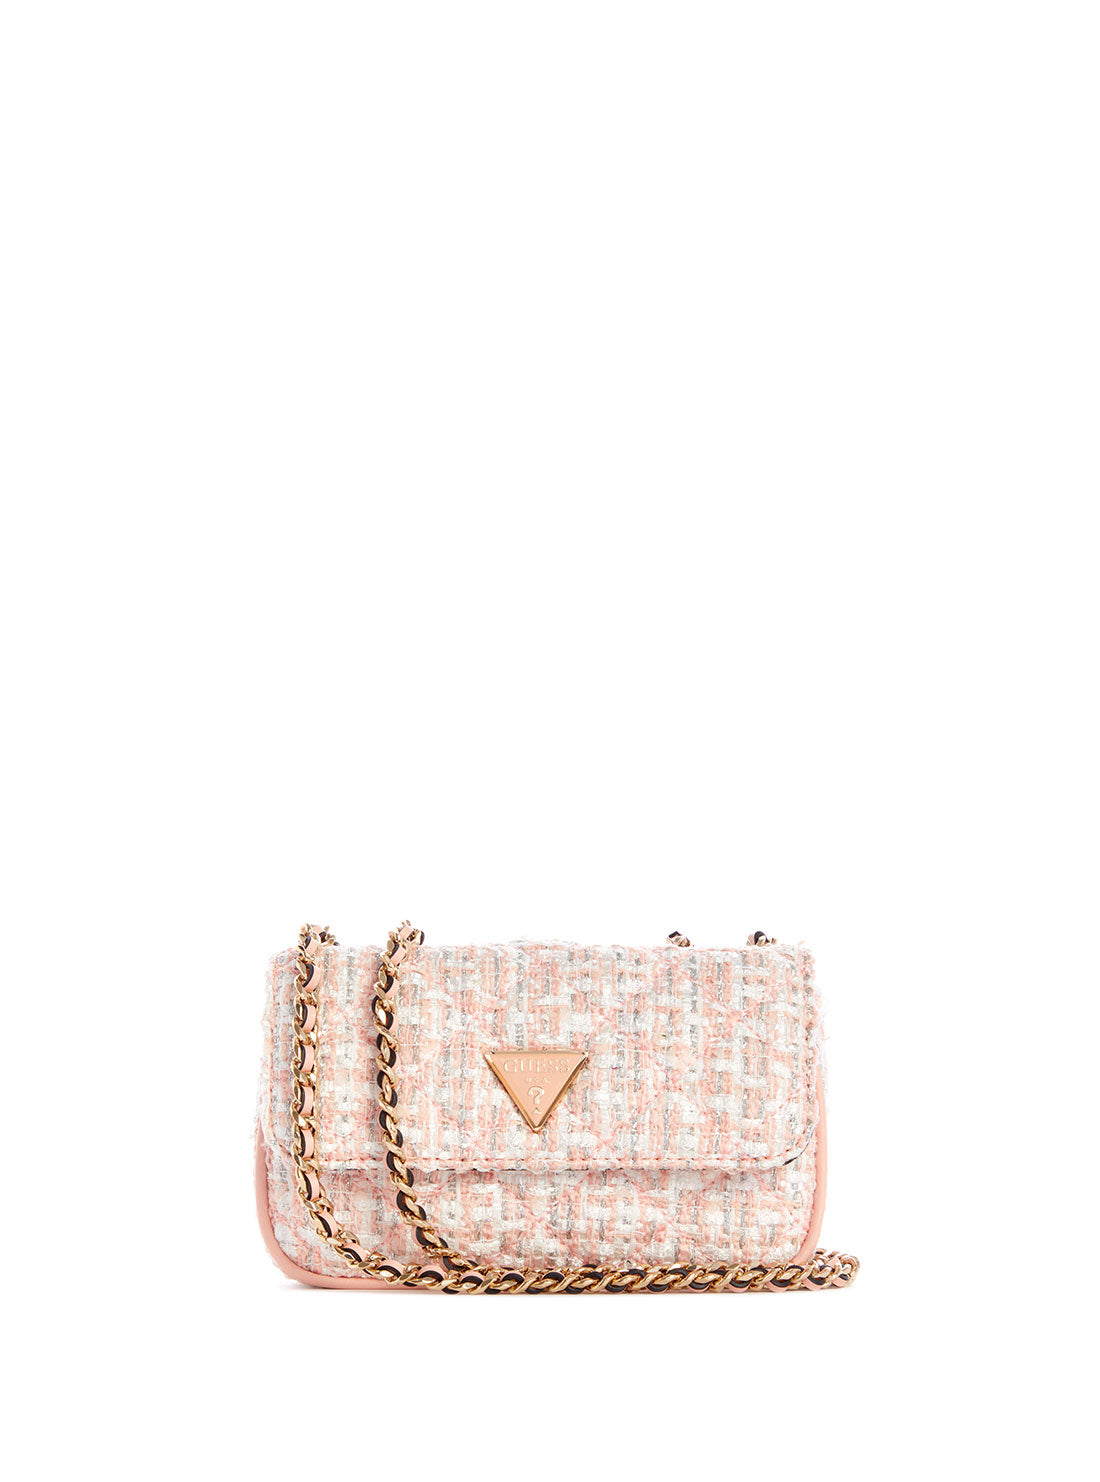 GUESS Womens Pink Multi Tweed Cessily Micro Mini Crossbody Bag PT767978 Front View